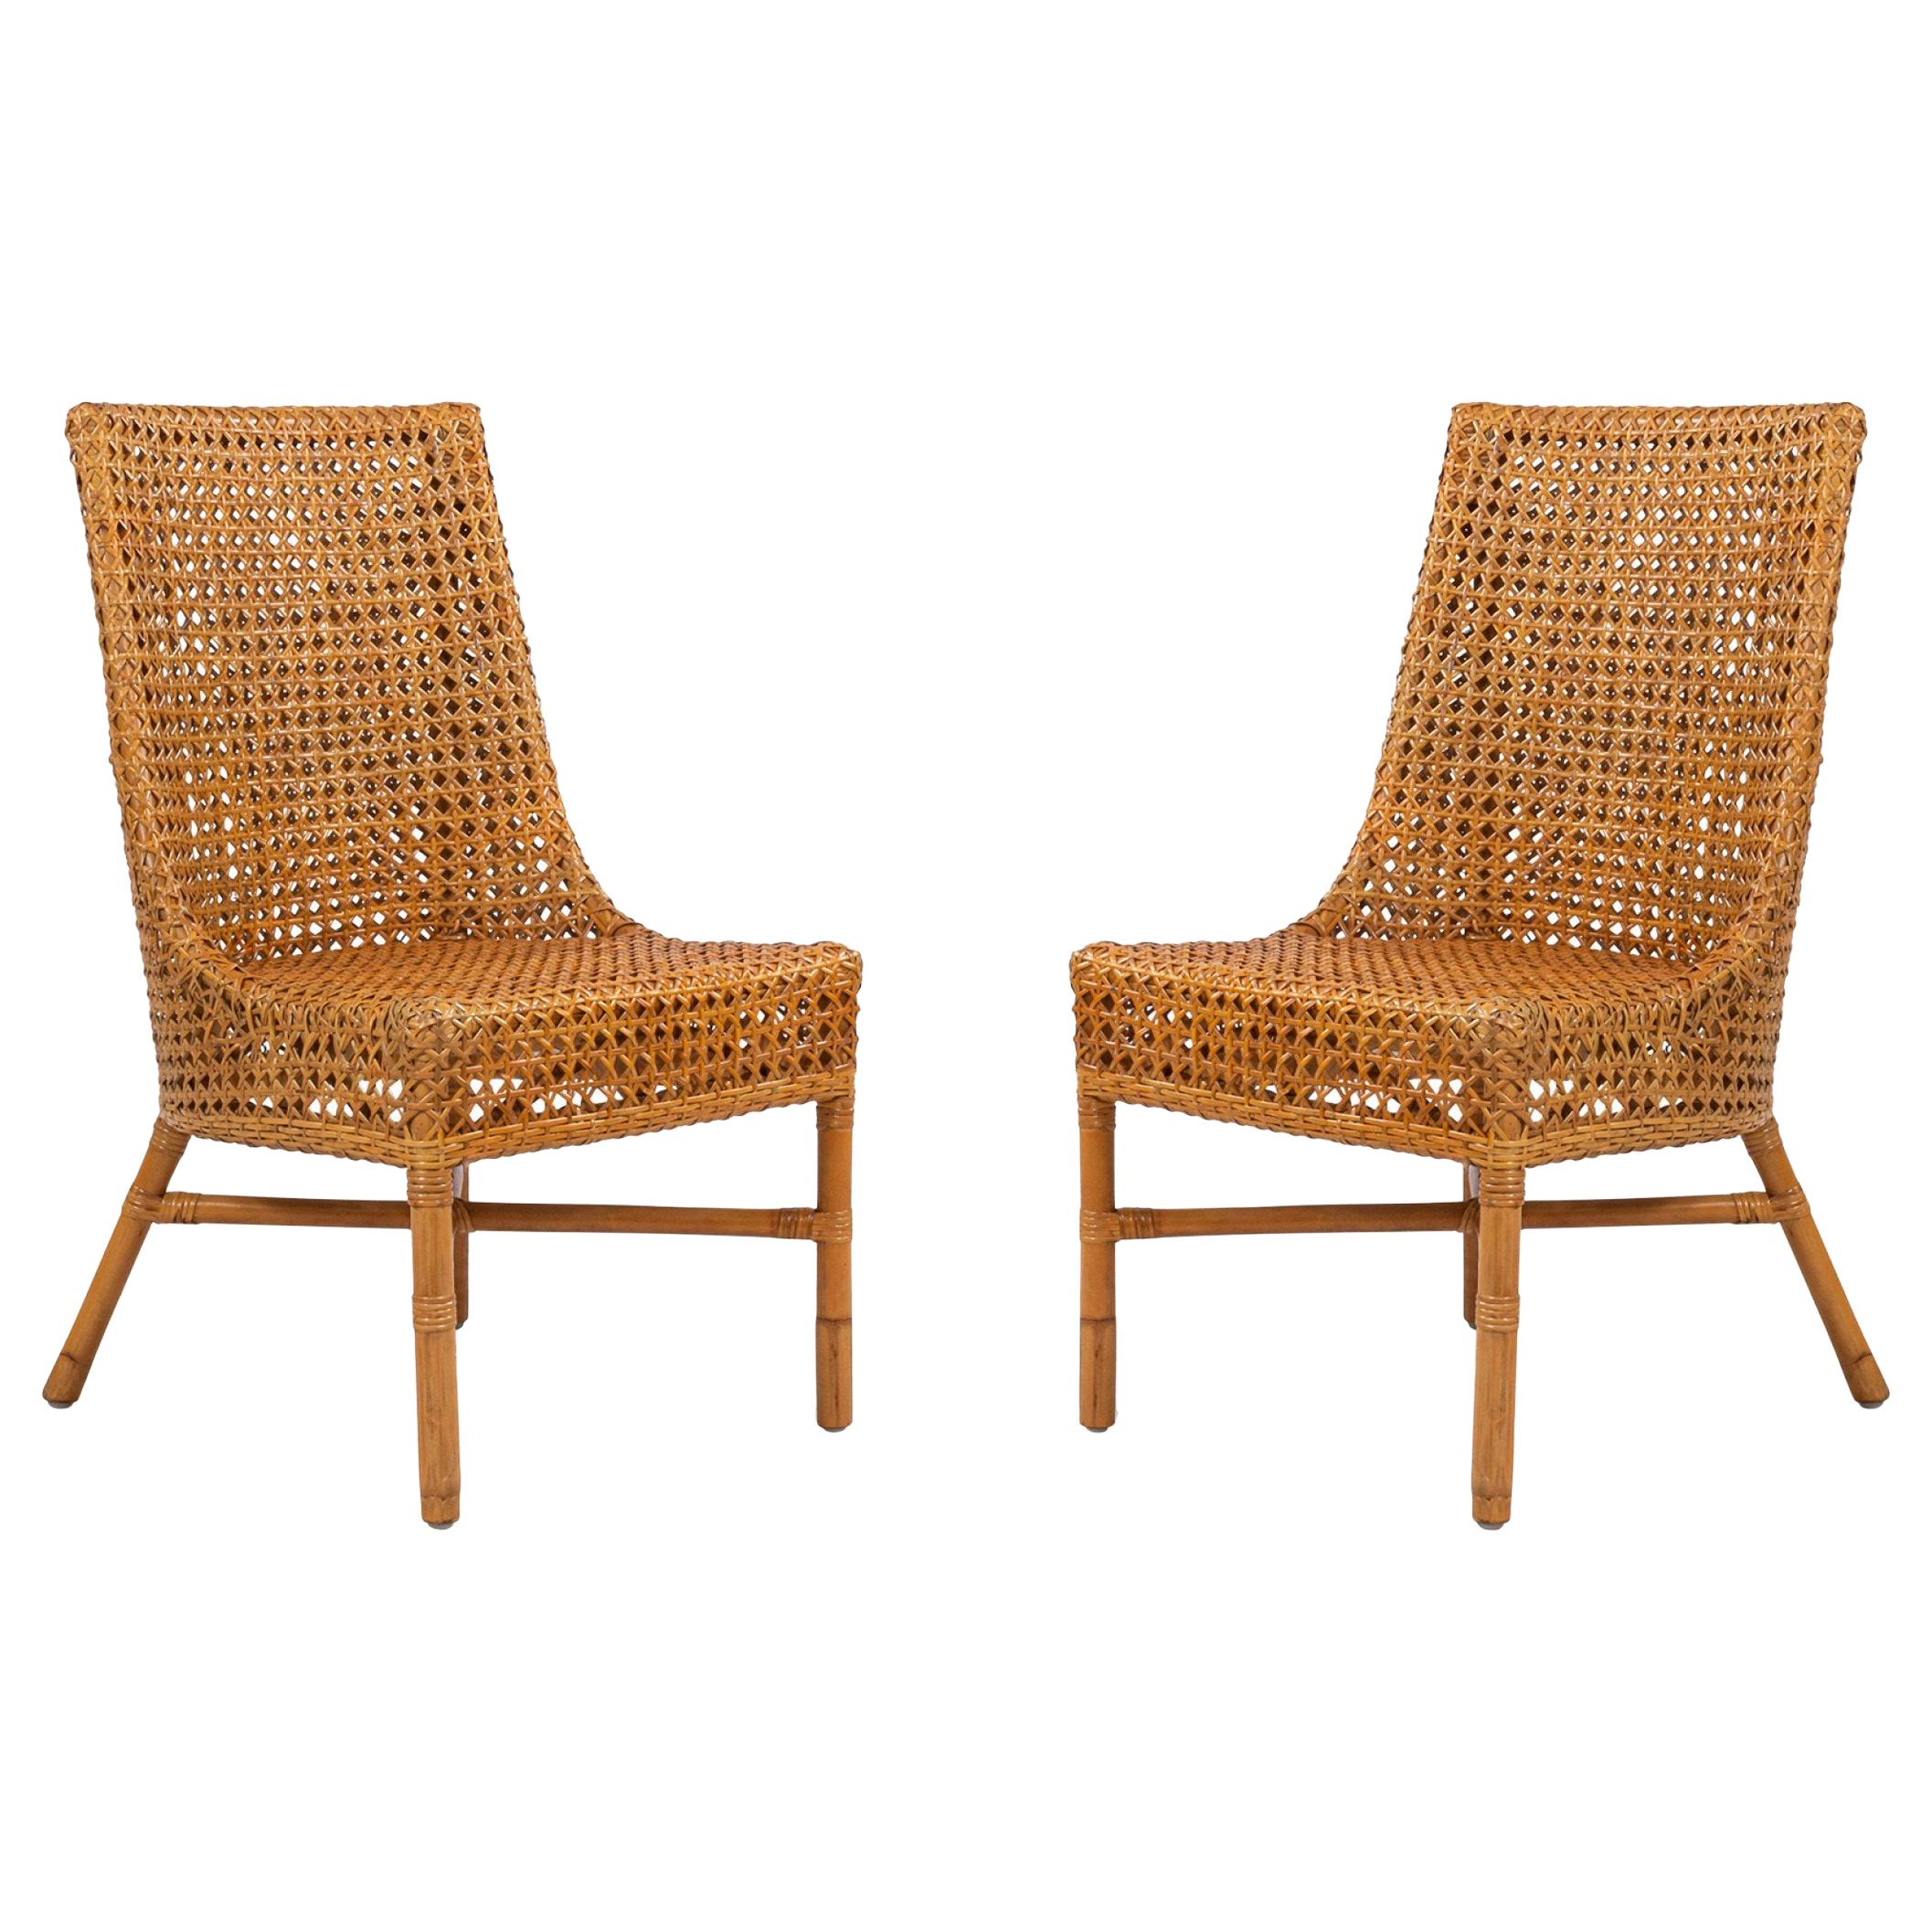 Contemporary Wicker Side Chairs